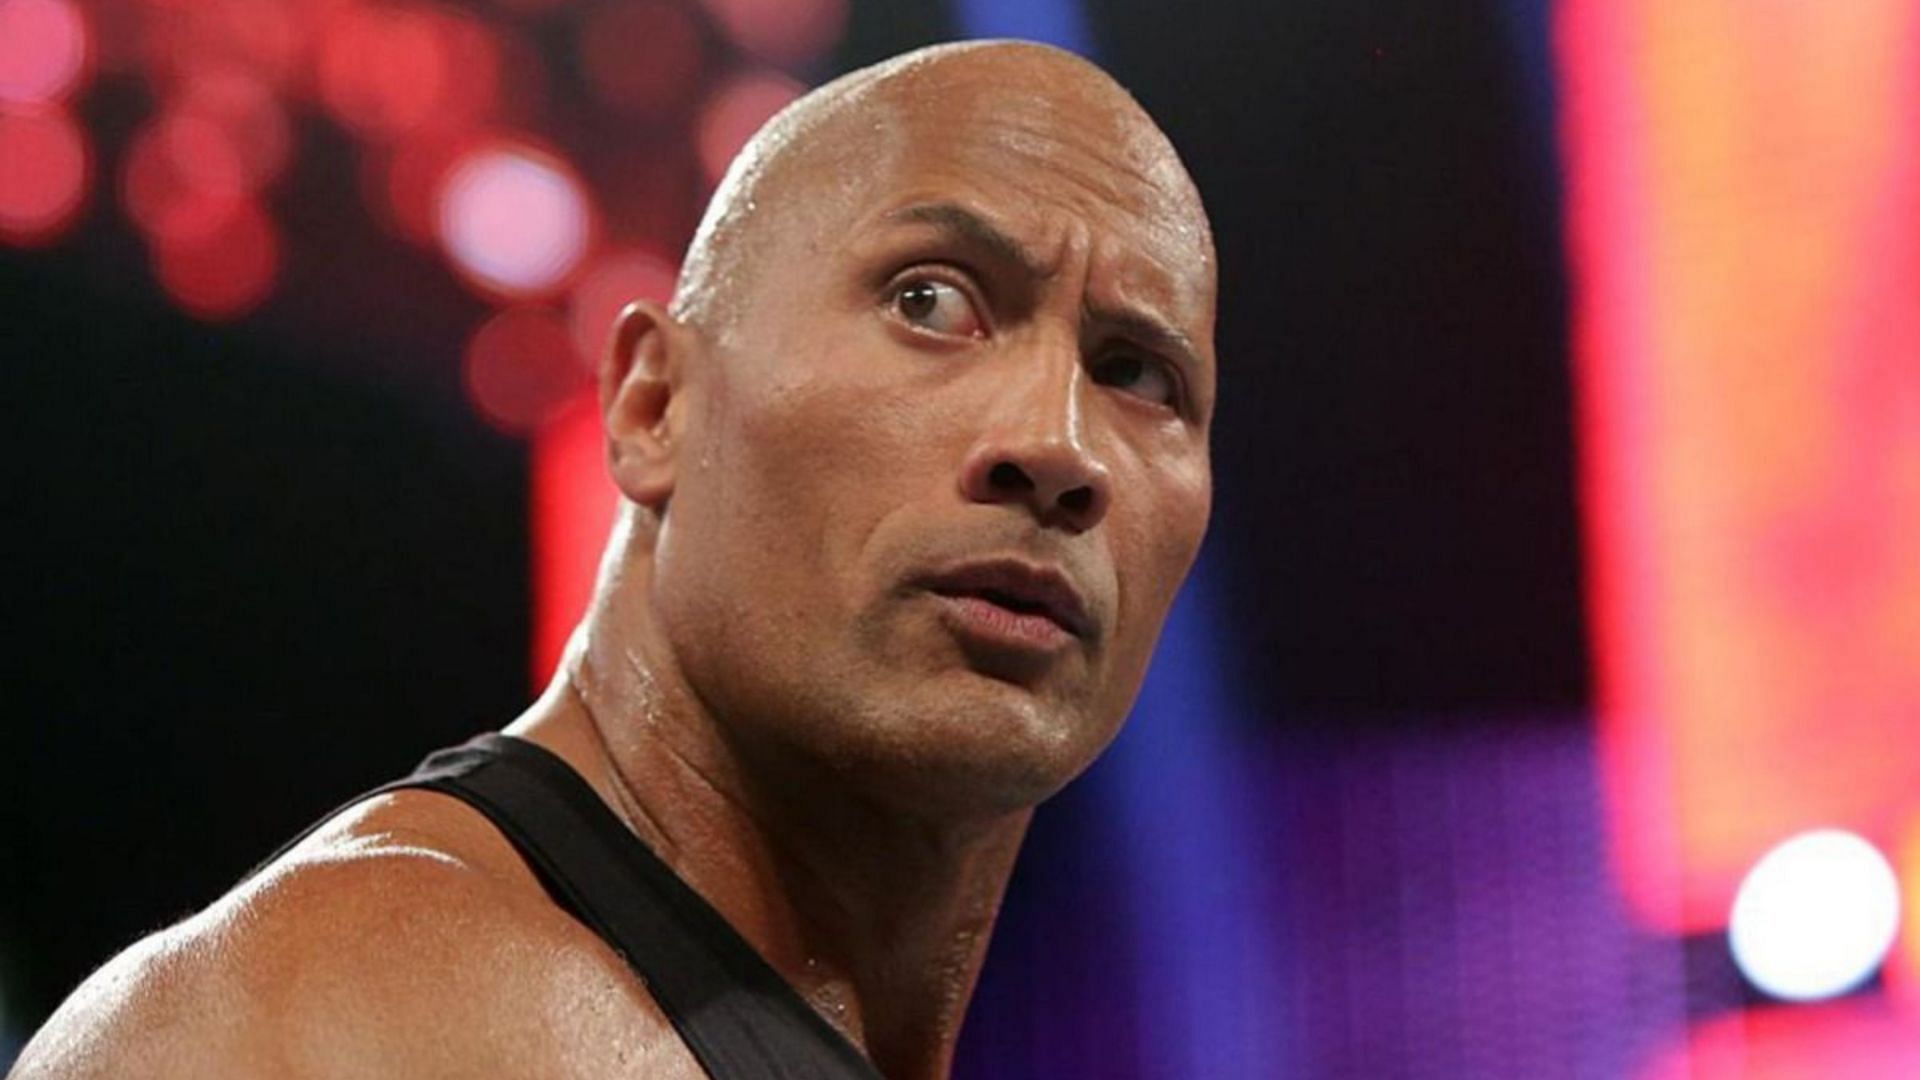 Will The Rock return to WWE at the Royal Rumble premium live event?